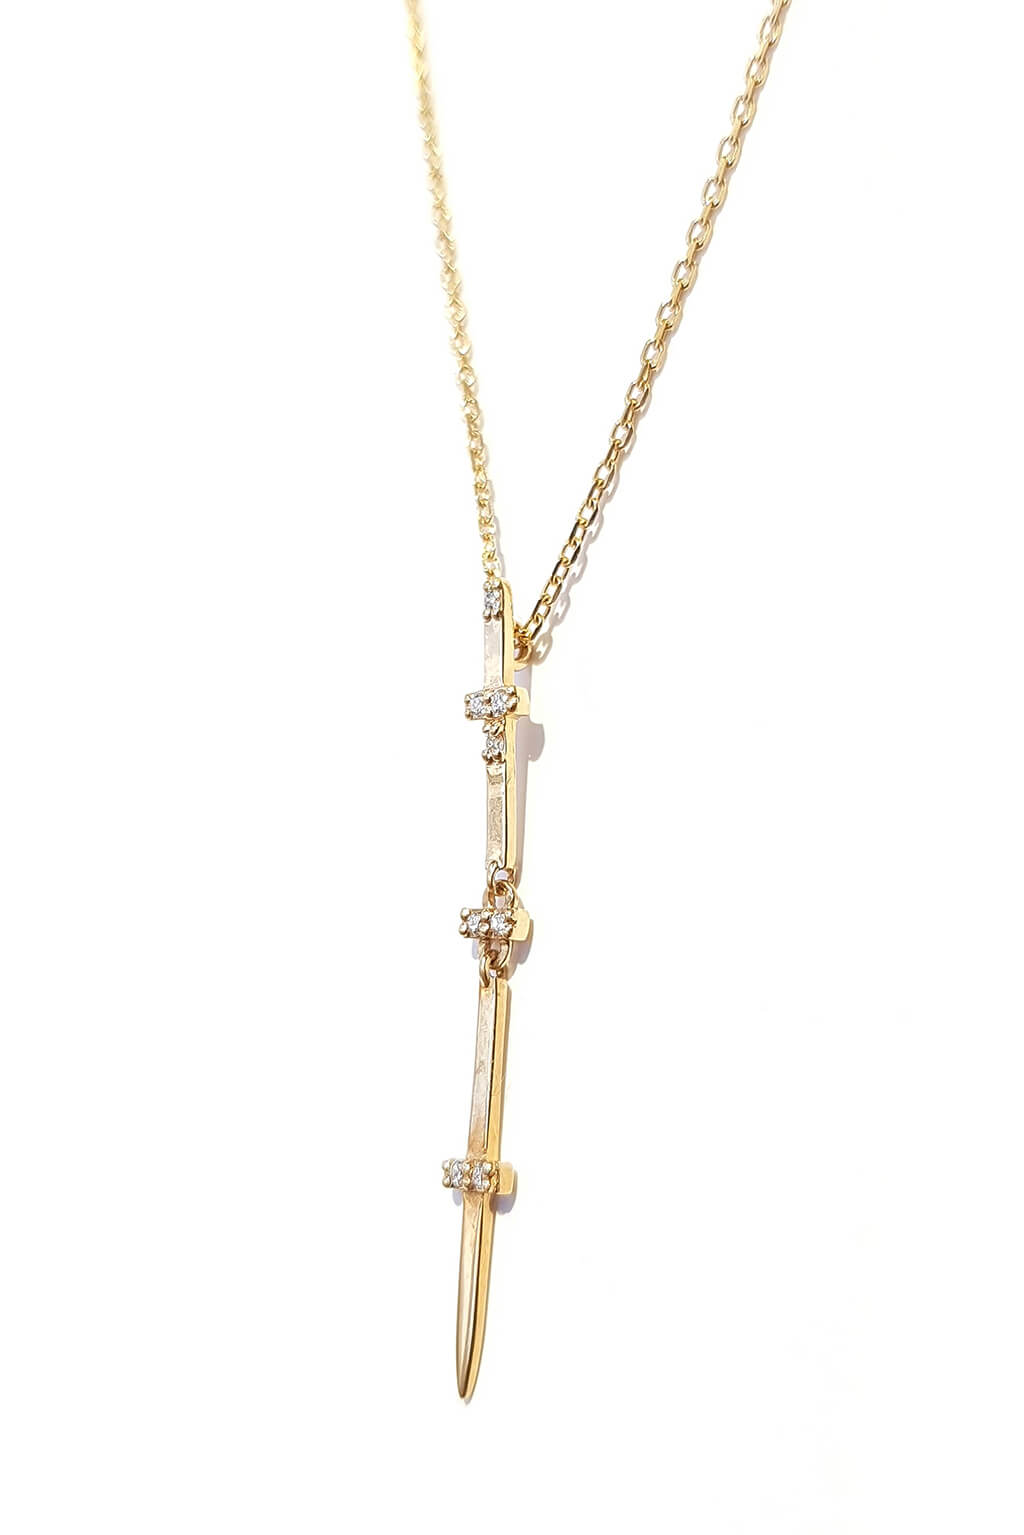 Long Sword gold necklace